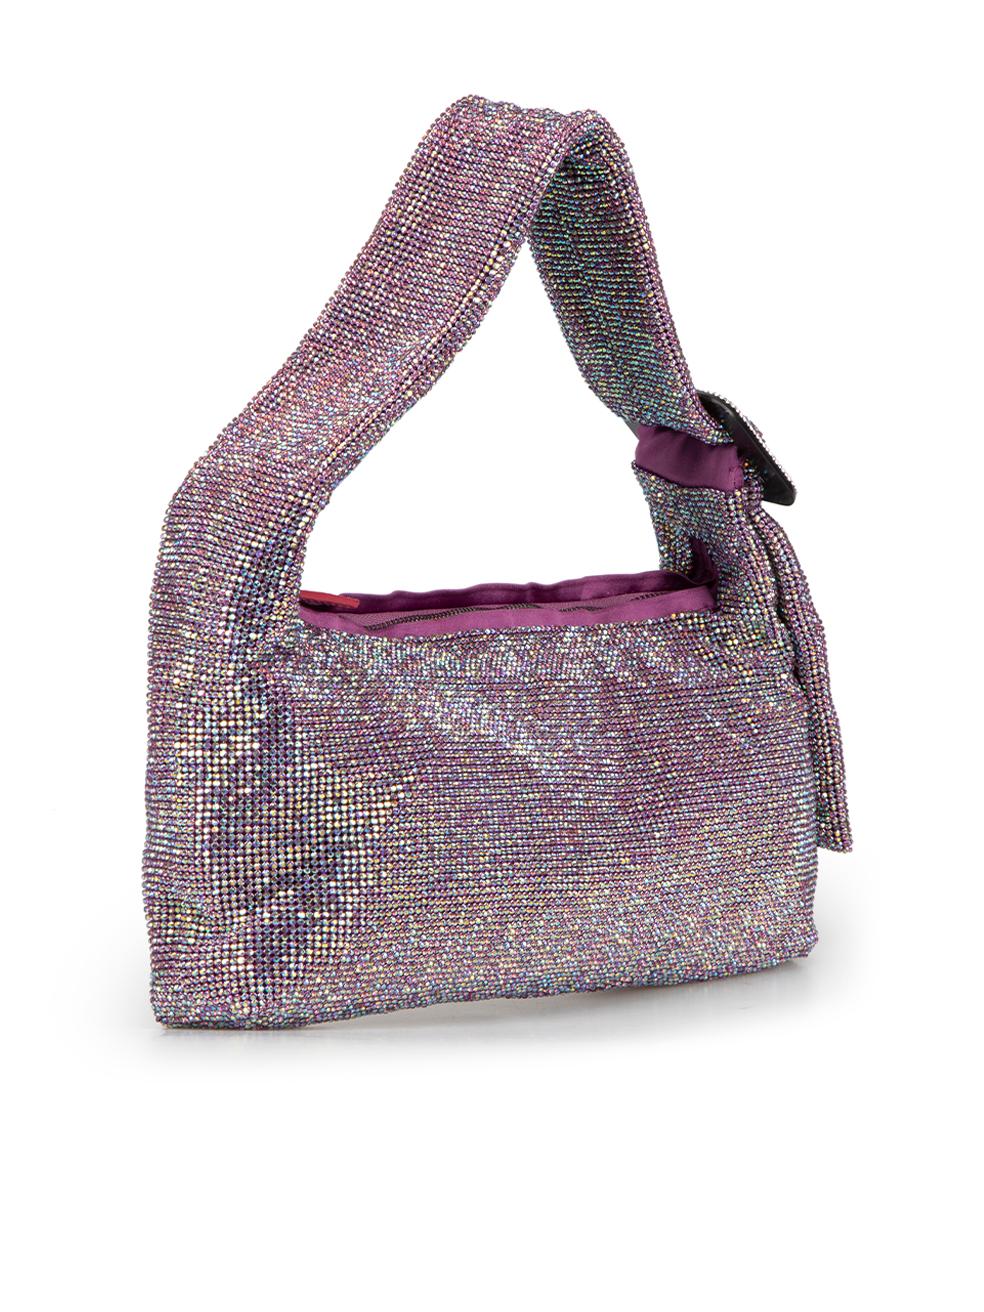 CONDITION is Never Worn. No visible wear to bag is evident on this used Benedetta Bruzziches designer resale item. This item comes with the original dustbag.



Details


Purple

Crystal and satin

Shoulder bag

Mini

Crystal embellished

1x Top